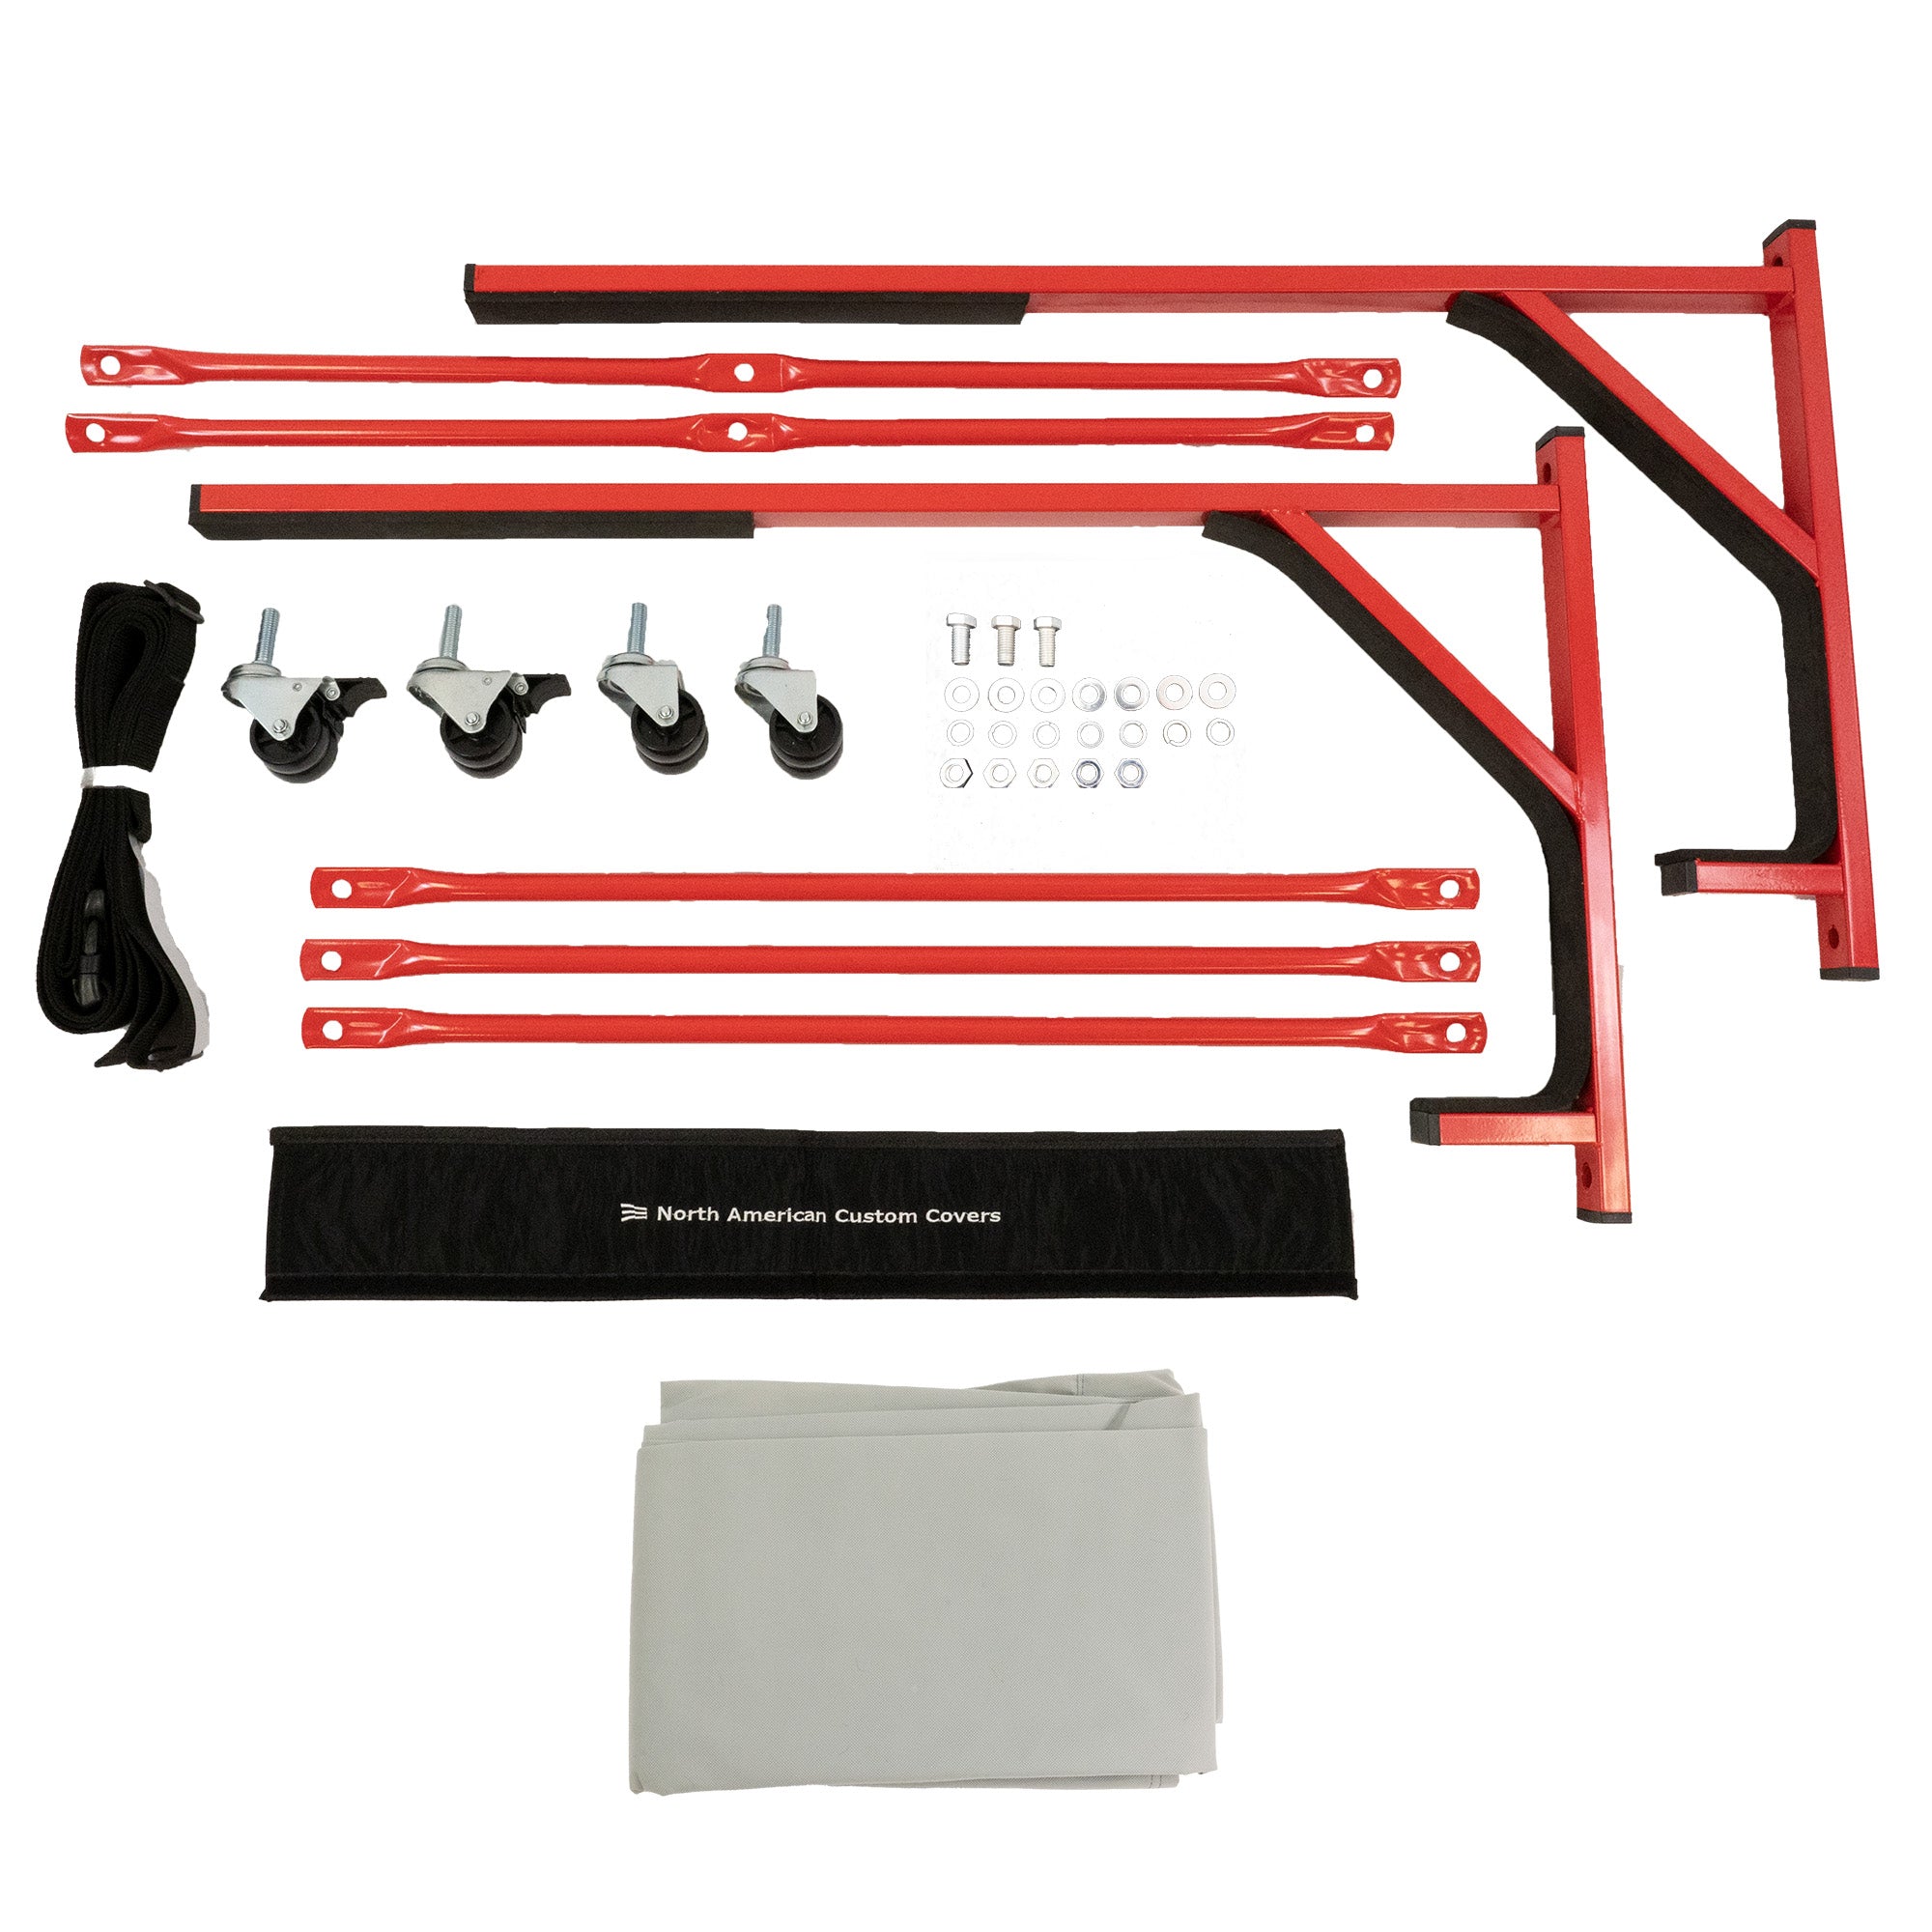 MG MGA, MGB Roadster, MG F, MG TF, MG Midget Heavy-duty Hardtop Stand Trolley Cart Rack (Red) with Securing Harness and Hard Top Dust Cover (050R)